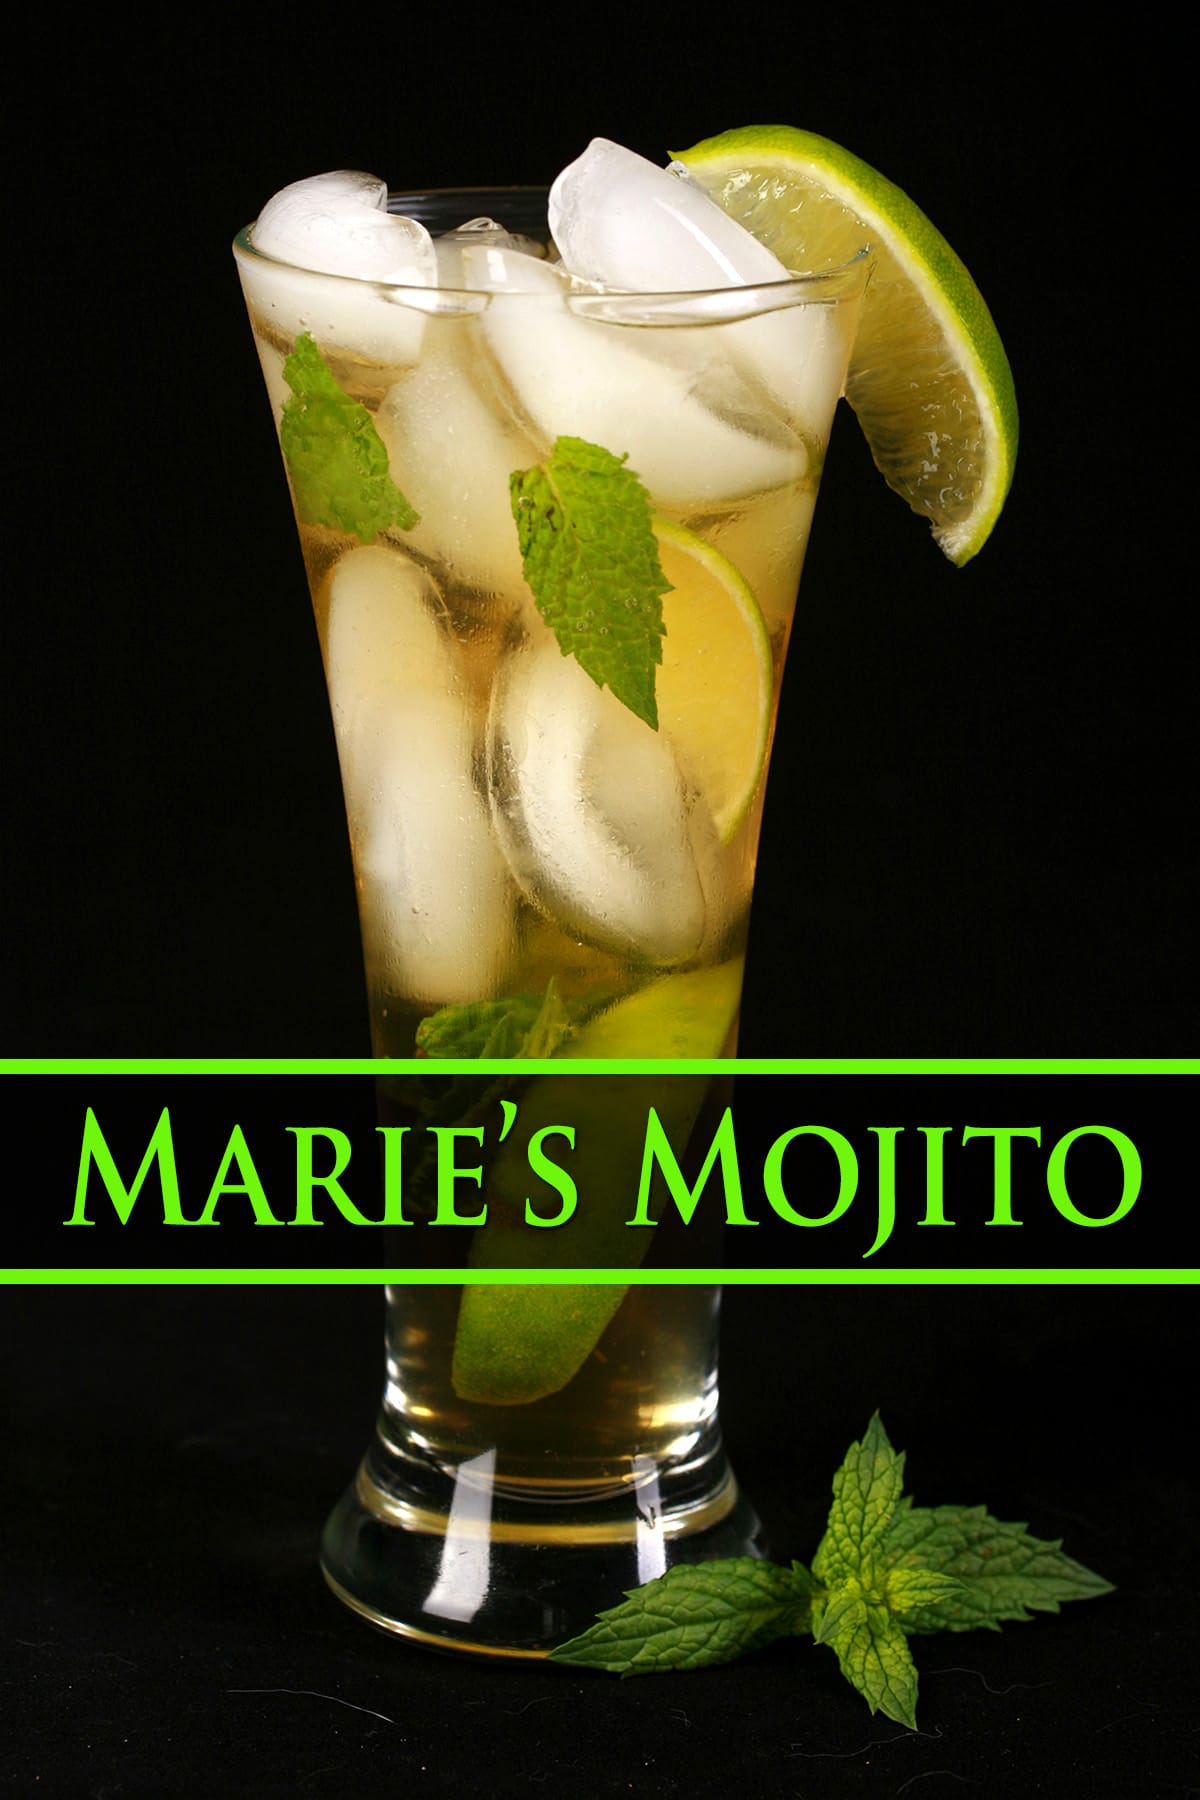 A close up view of Marie's Mojito Recipe - A tall glass with ice, limes, and mint in it, along with a pale amber liquid. It is garnished with a slice of lime.